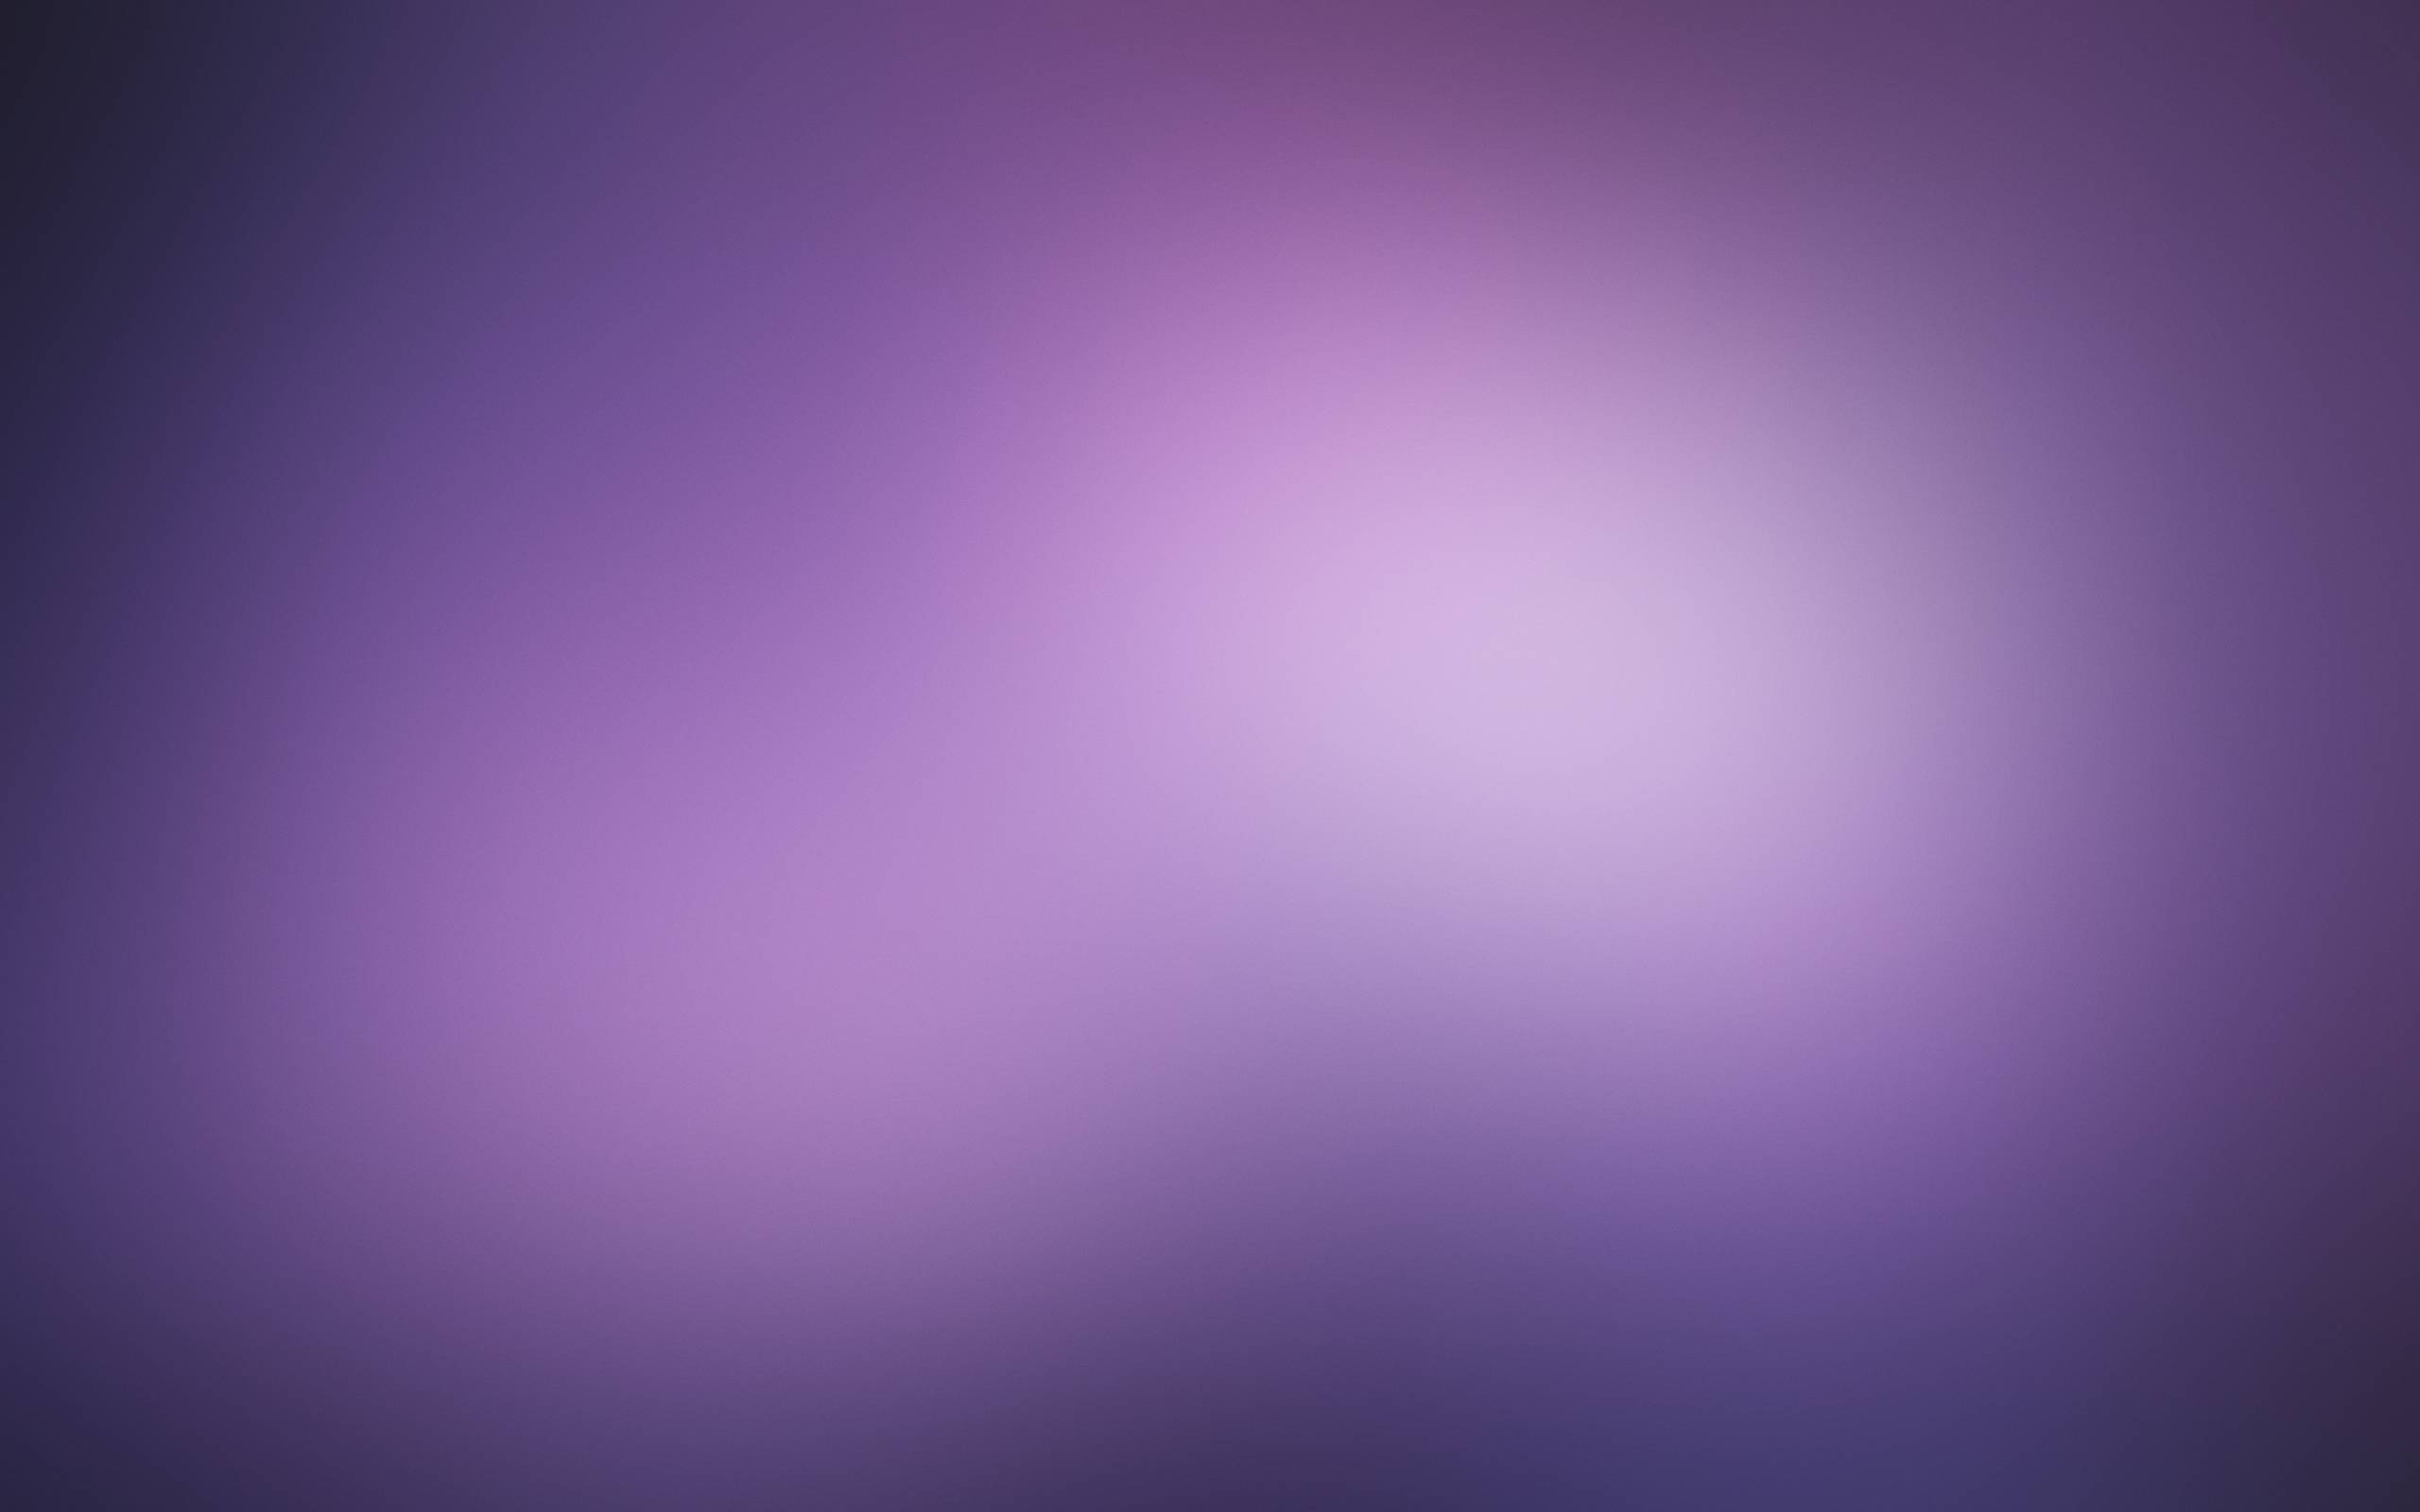 39 High Definition Purple Wallpaper Images for Download 2560x1600